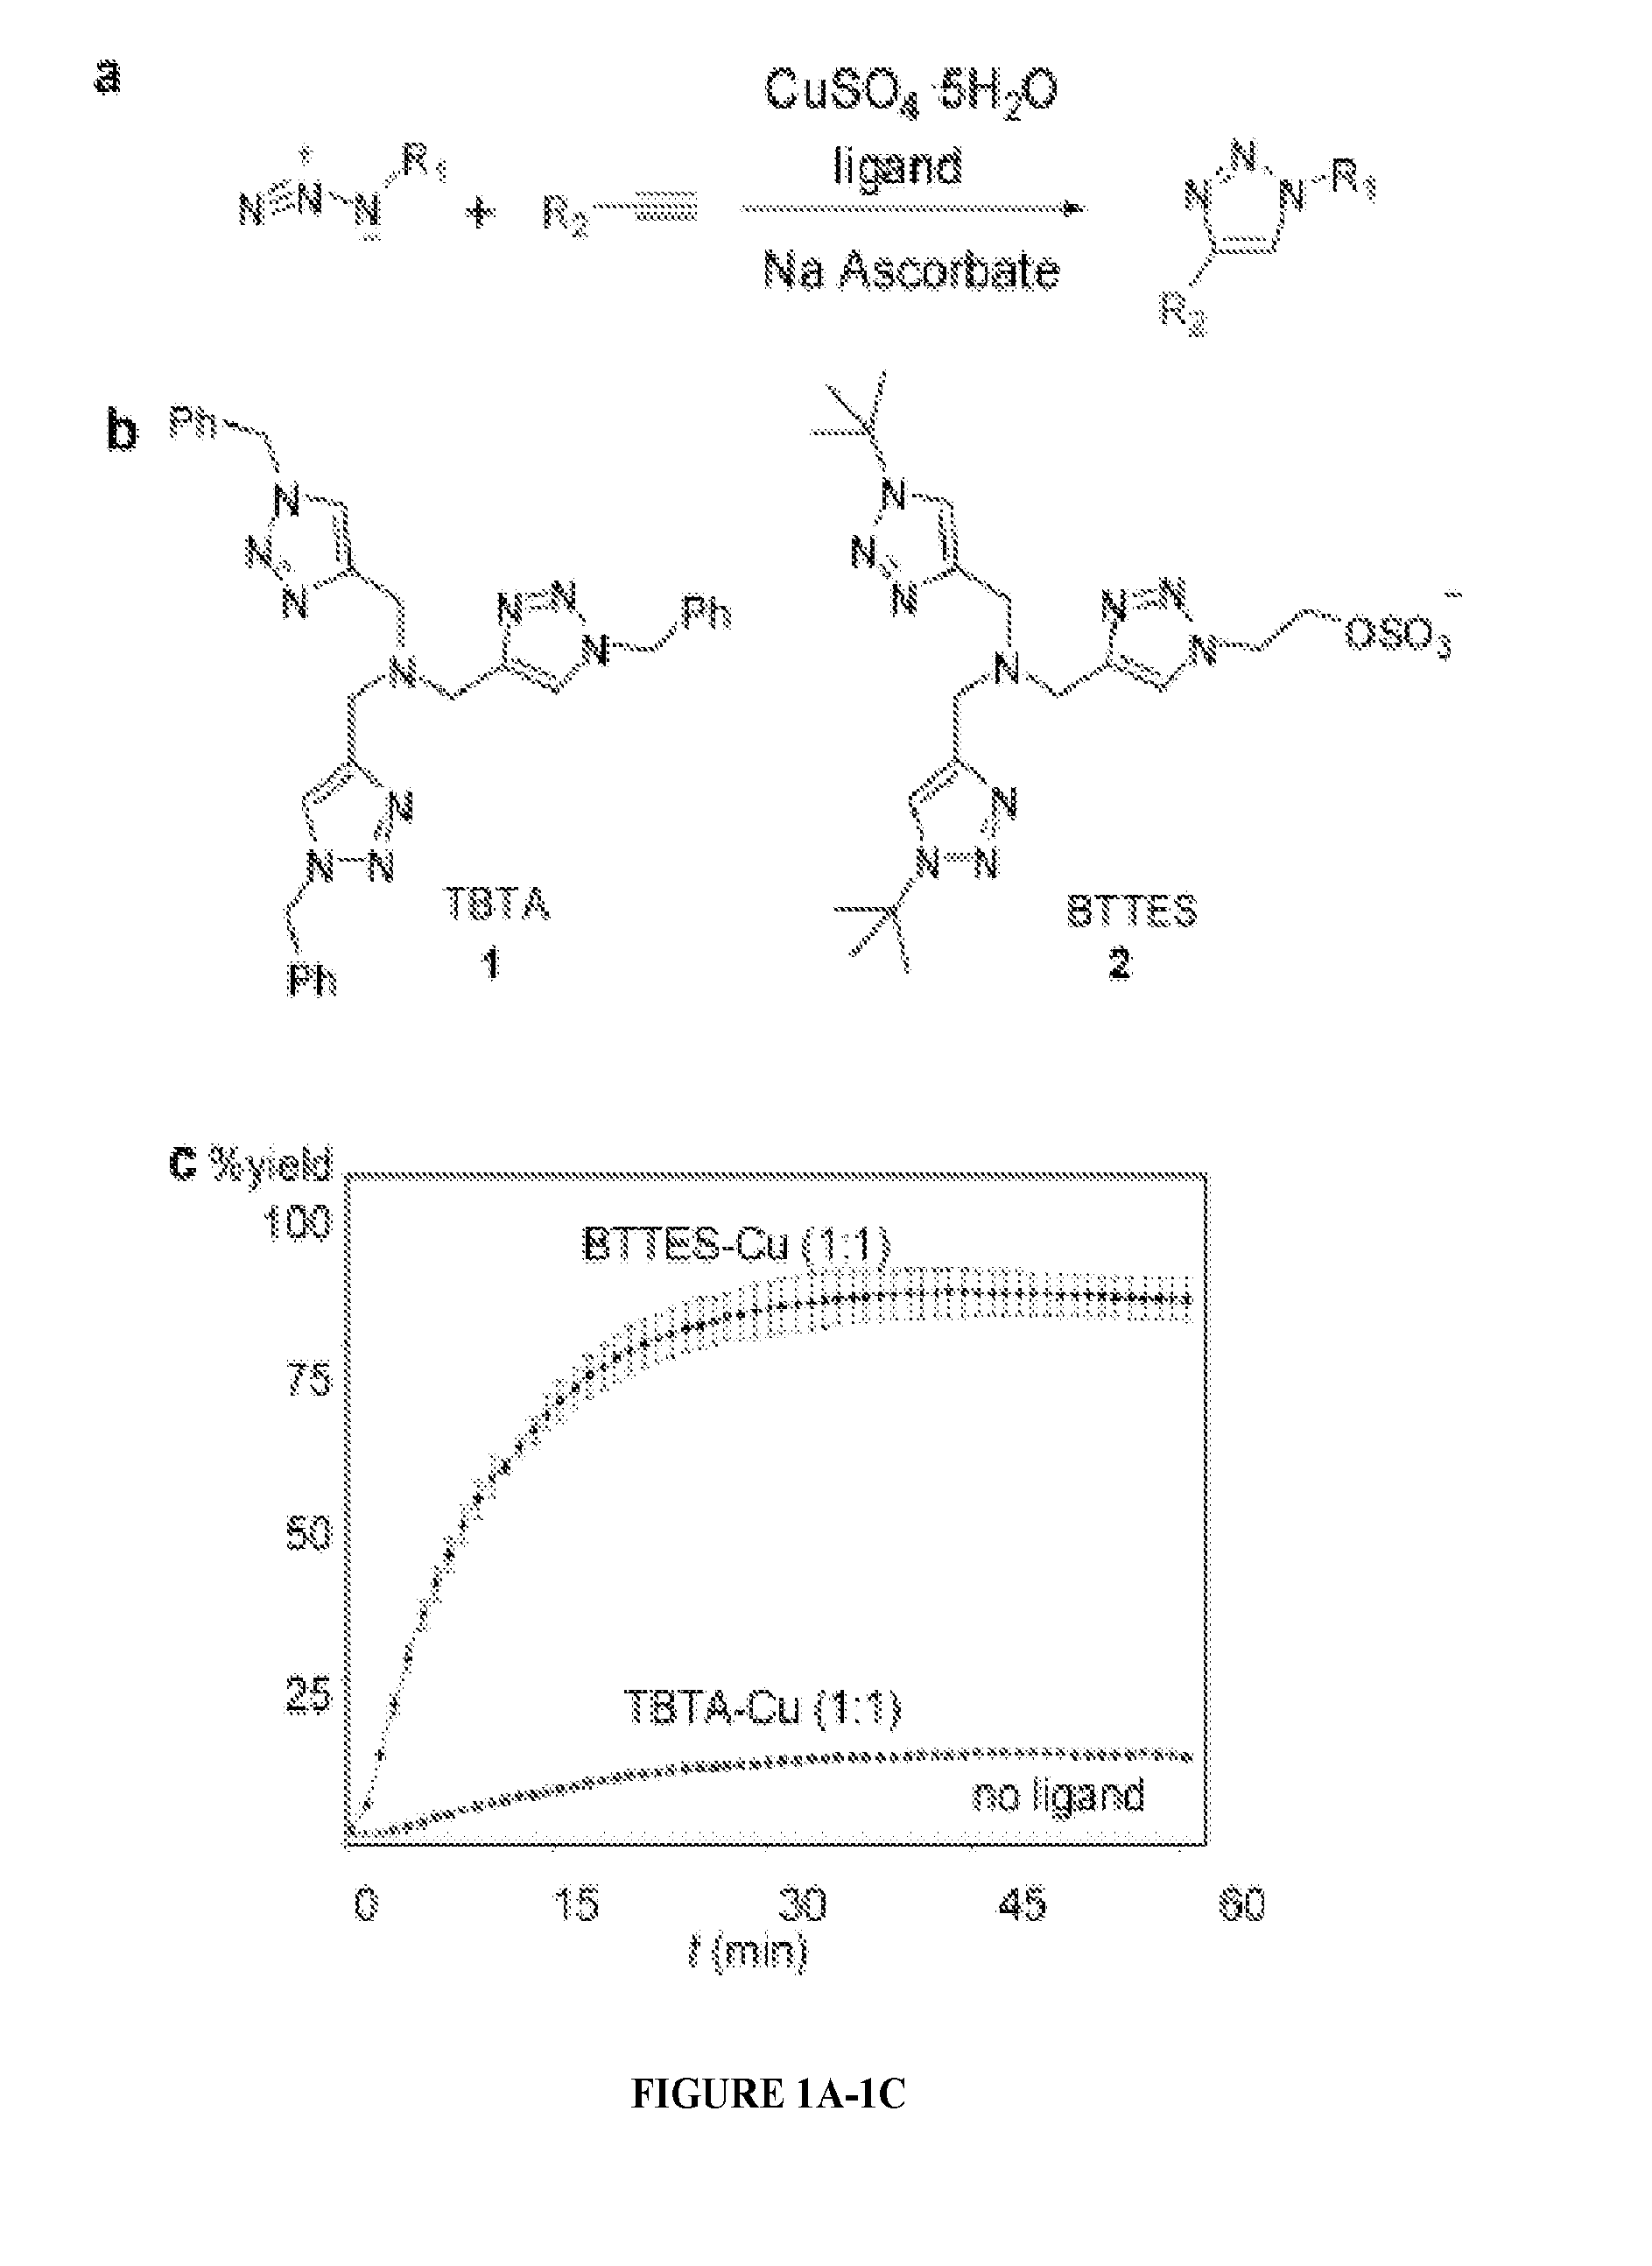 Ligands and methods for labeling biomolecules in vivo